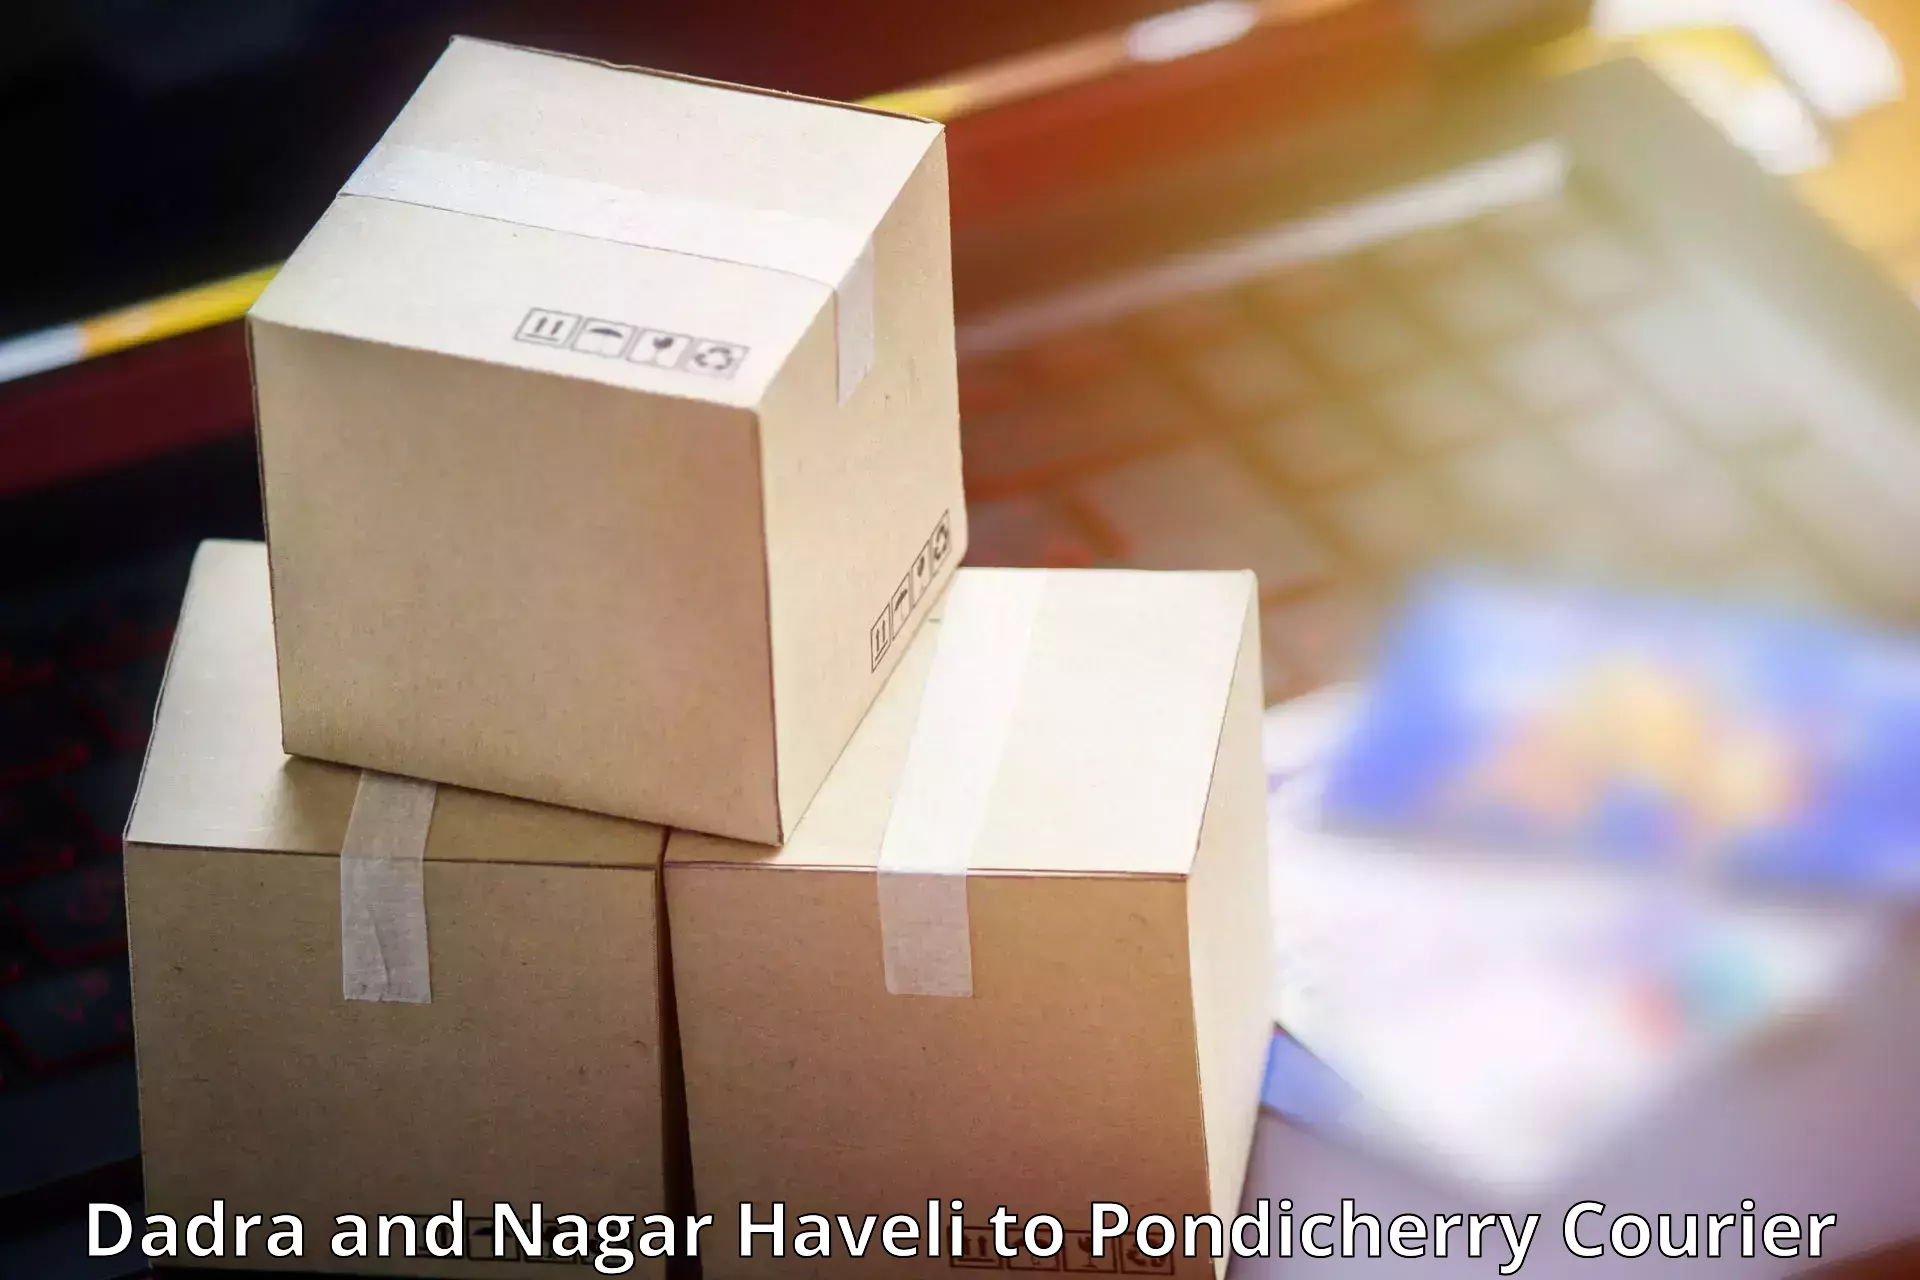 Subscription-based courier Dadra and Nagar Haveli to Pondicherry University